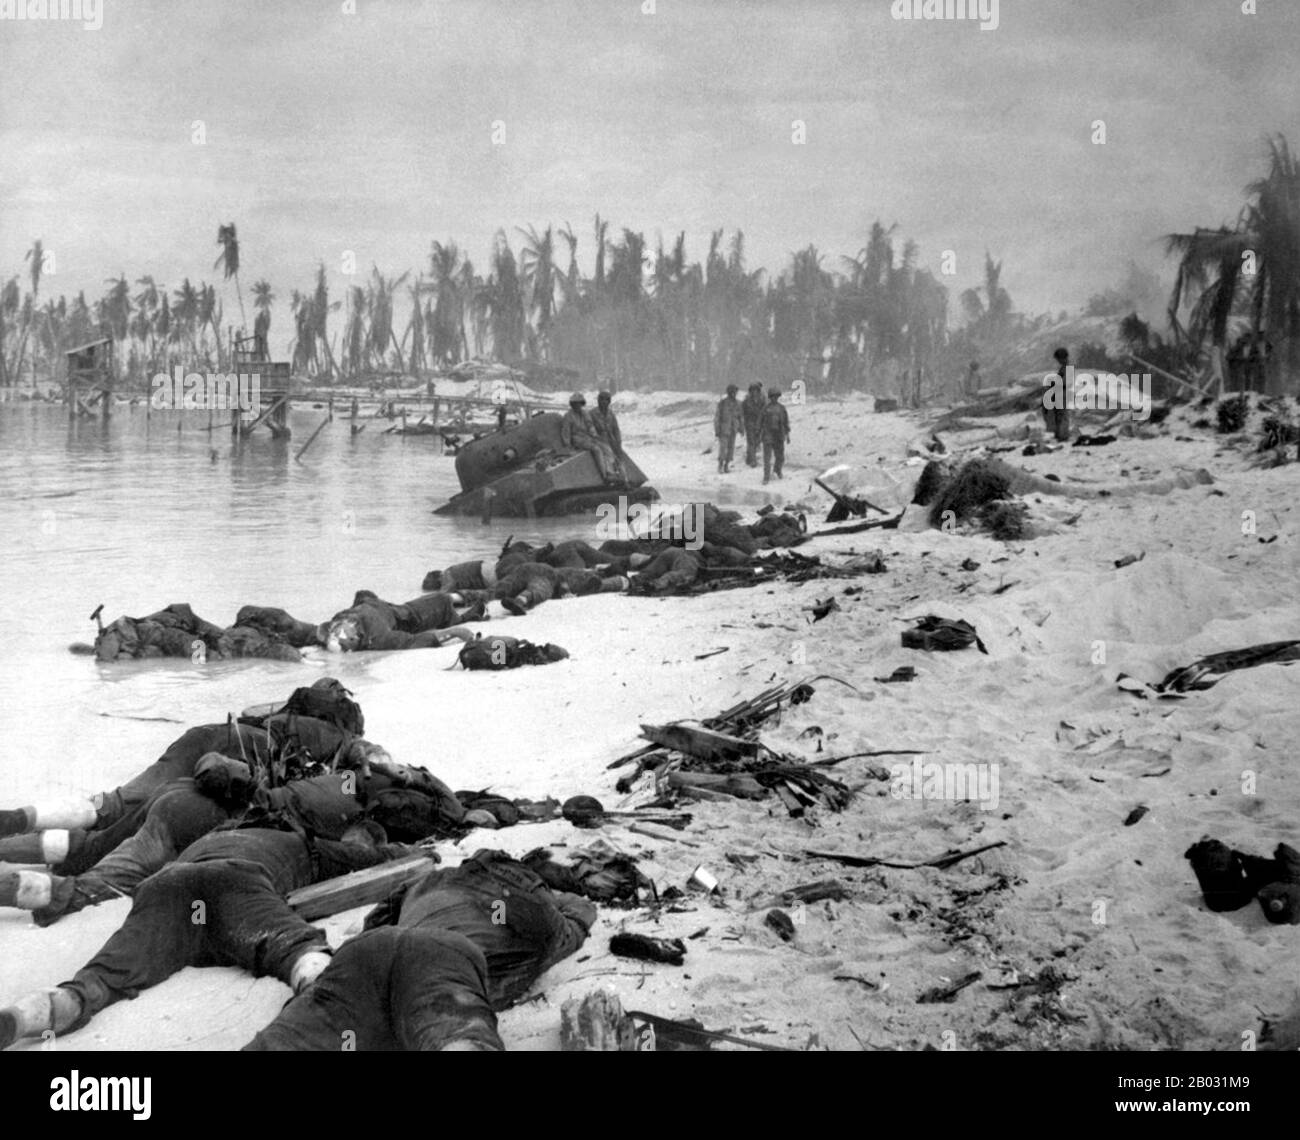 The Battle of Tarawa was a battle in the Pacific Theatre of World War II that was fought from November 20 to November 23, 1943. It took place at the Tarawa Atoll in the Gilbert Islands. Nearly 6,400 Japanese, Koreans, and Americans died in the fighting, mostly on and around the small island of Betio, in the extreme southwest of Tarawa Atoll.  The Battle of Tarawa was the first American offensive in the critical central Pacific region. It was also the first time in the war that the United States faced serious Japanese opposition to an amphibious landing. Previous landings met little or no initi Stock Photo